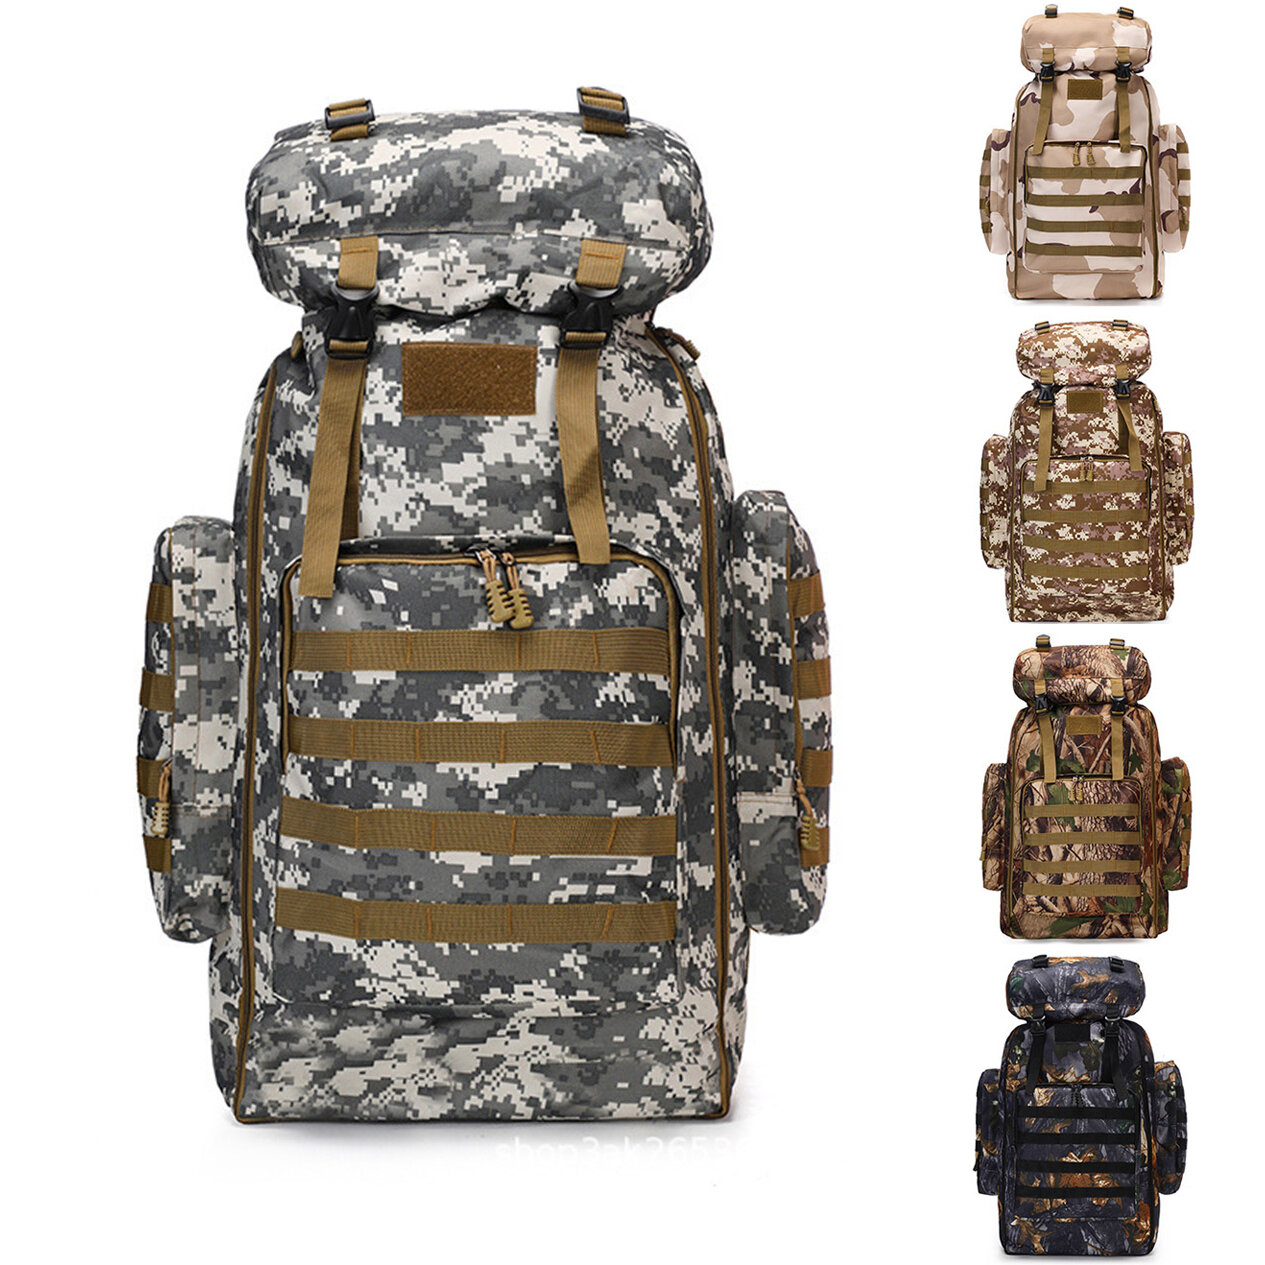 80L Waterproof Molle Camo Tactical Backpack Military Army Camping Backpack Travel Rucksack Outdoor Hiking Climbing Bag